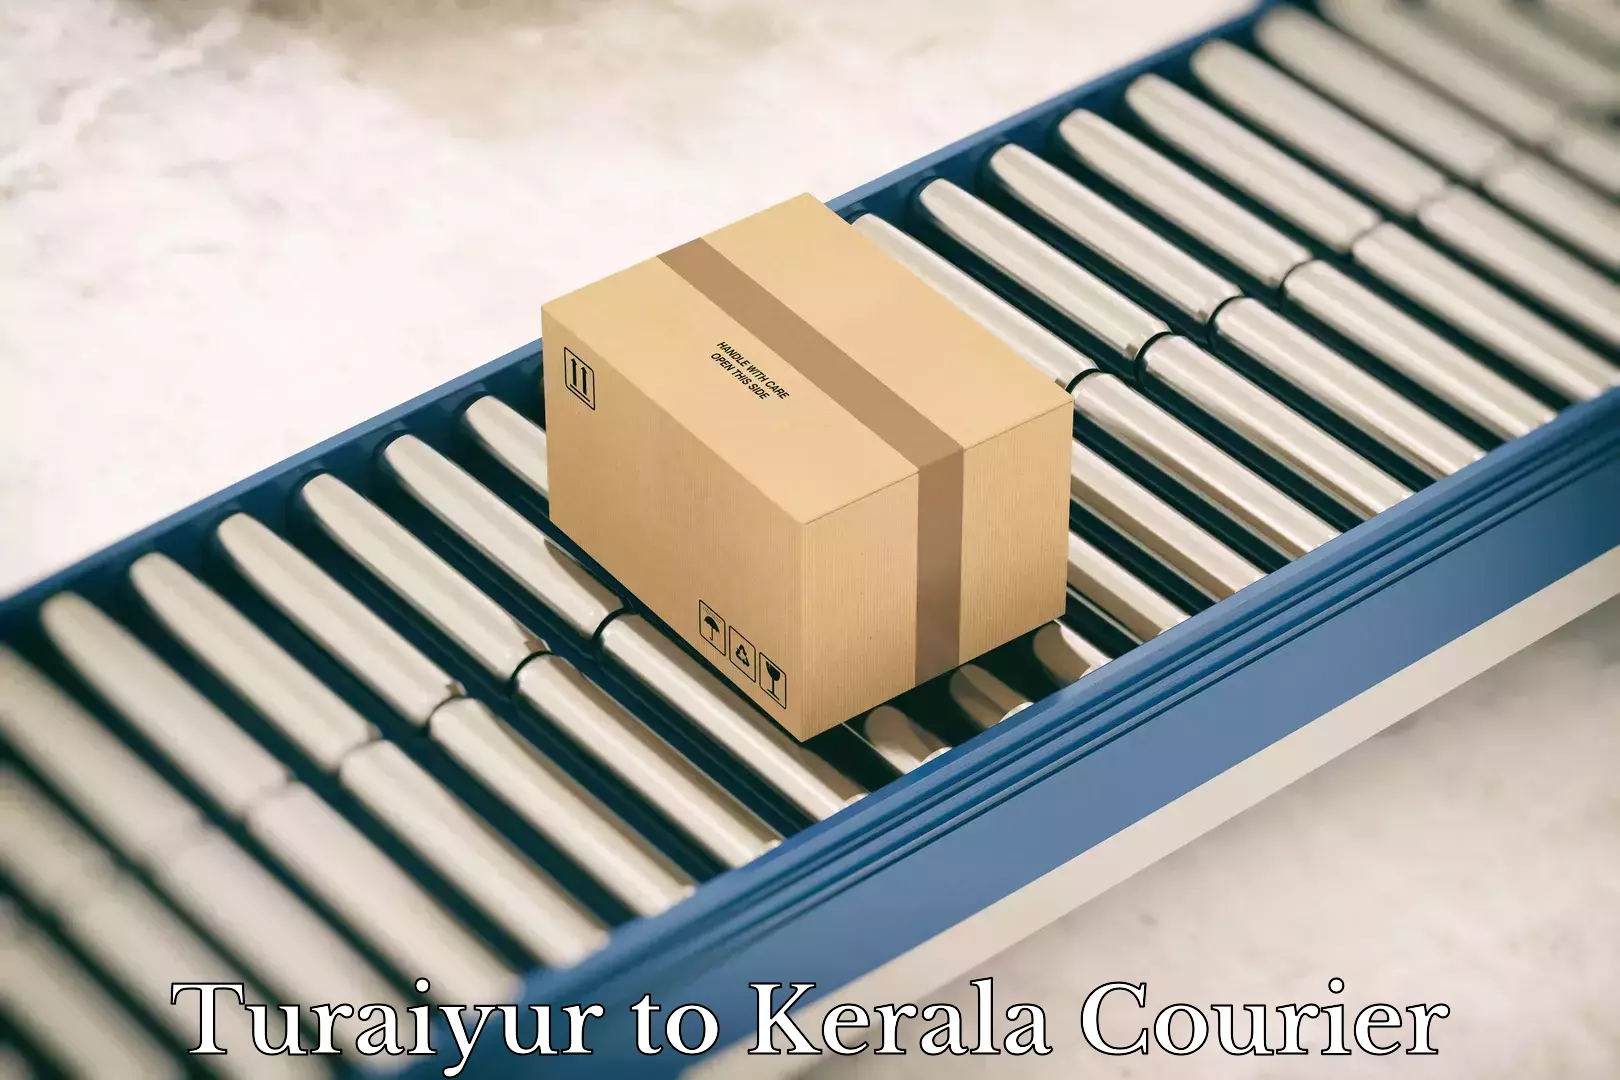 24-hour courier service Turaiyur to Kerala